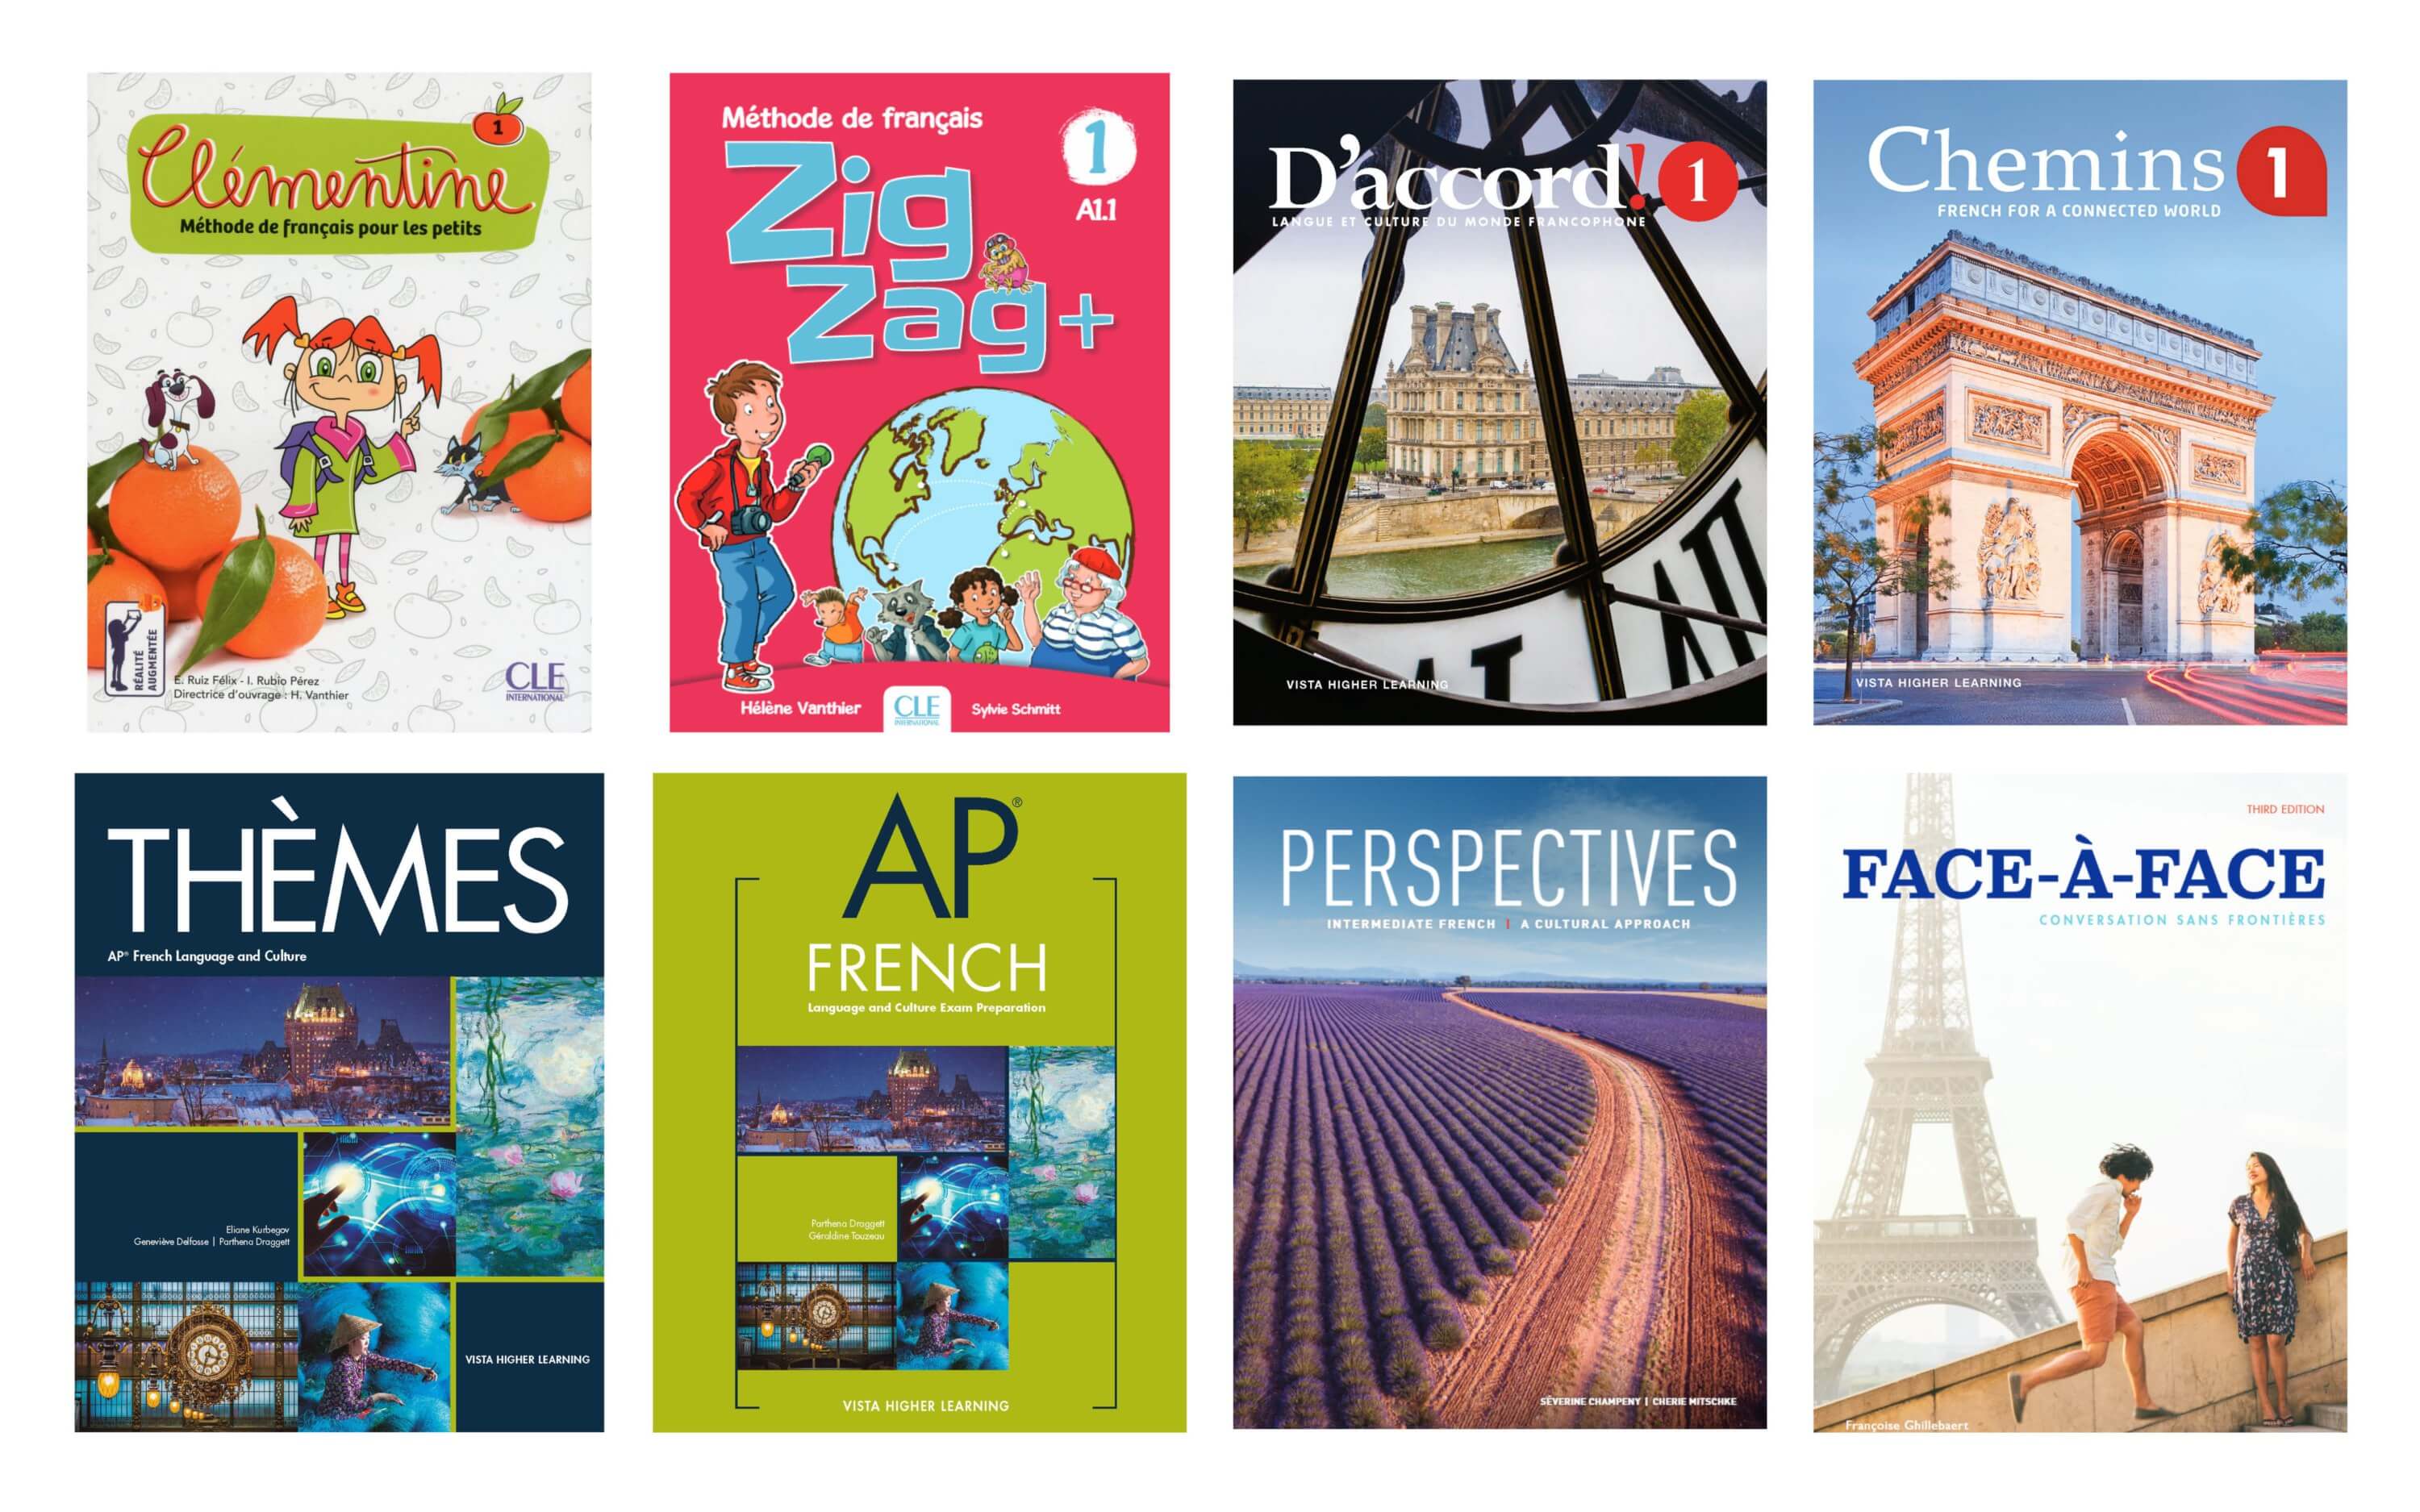 Vista world language  French textbook covers